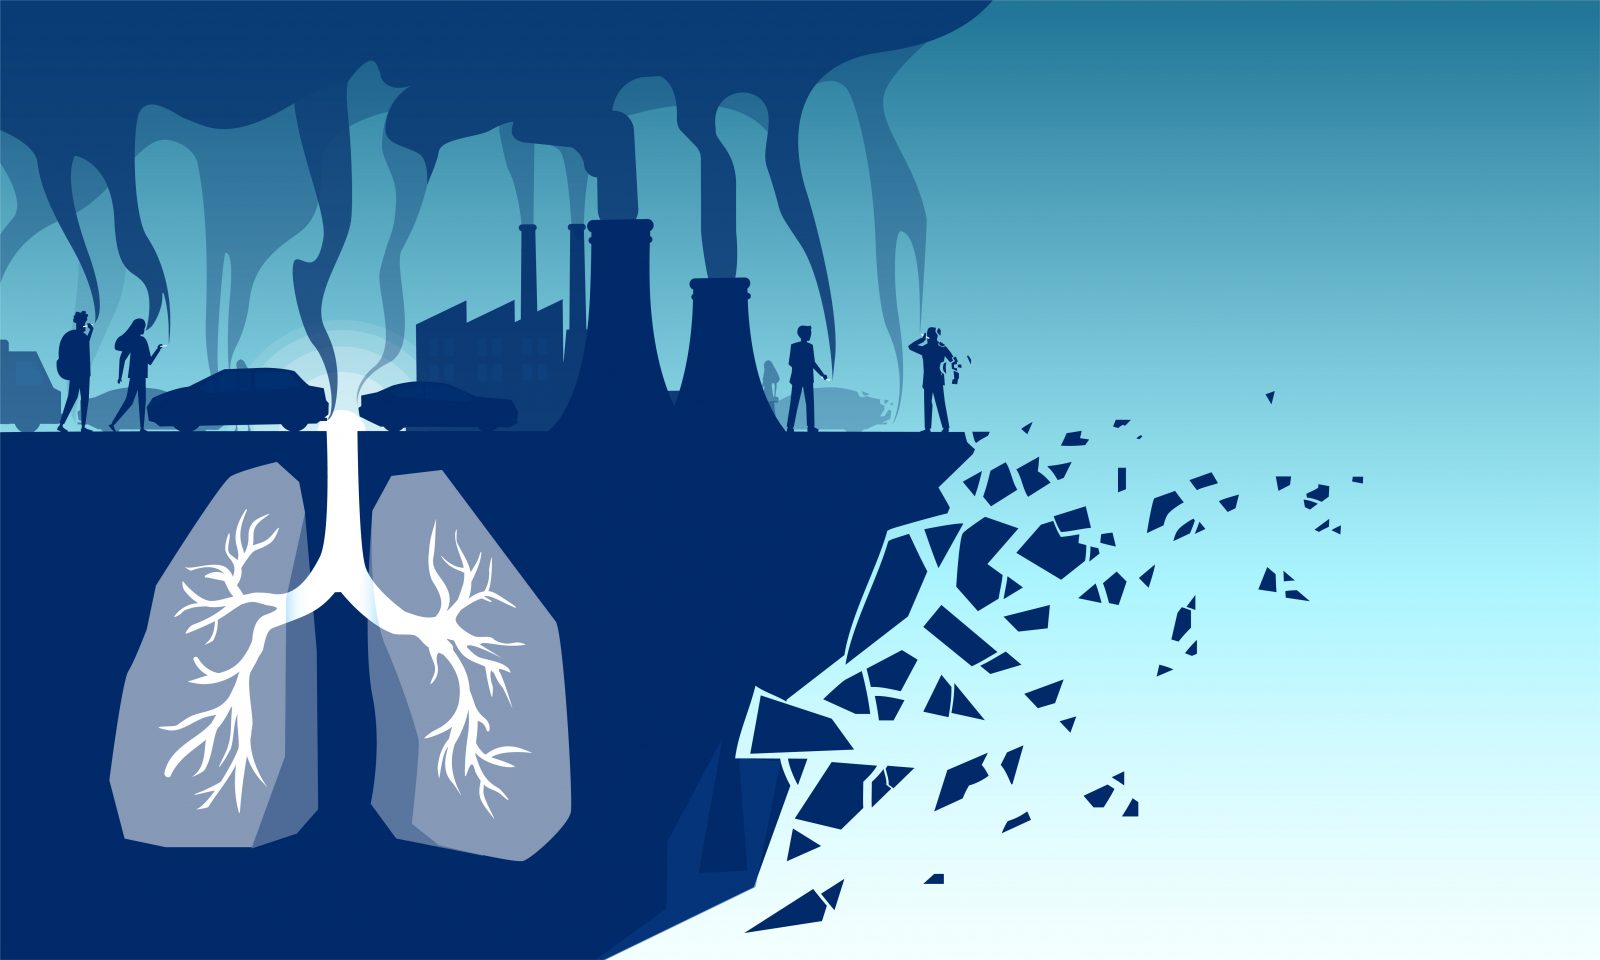 Illustration of polluted lungs